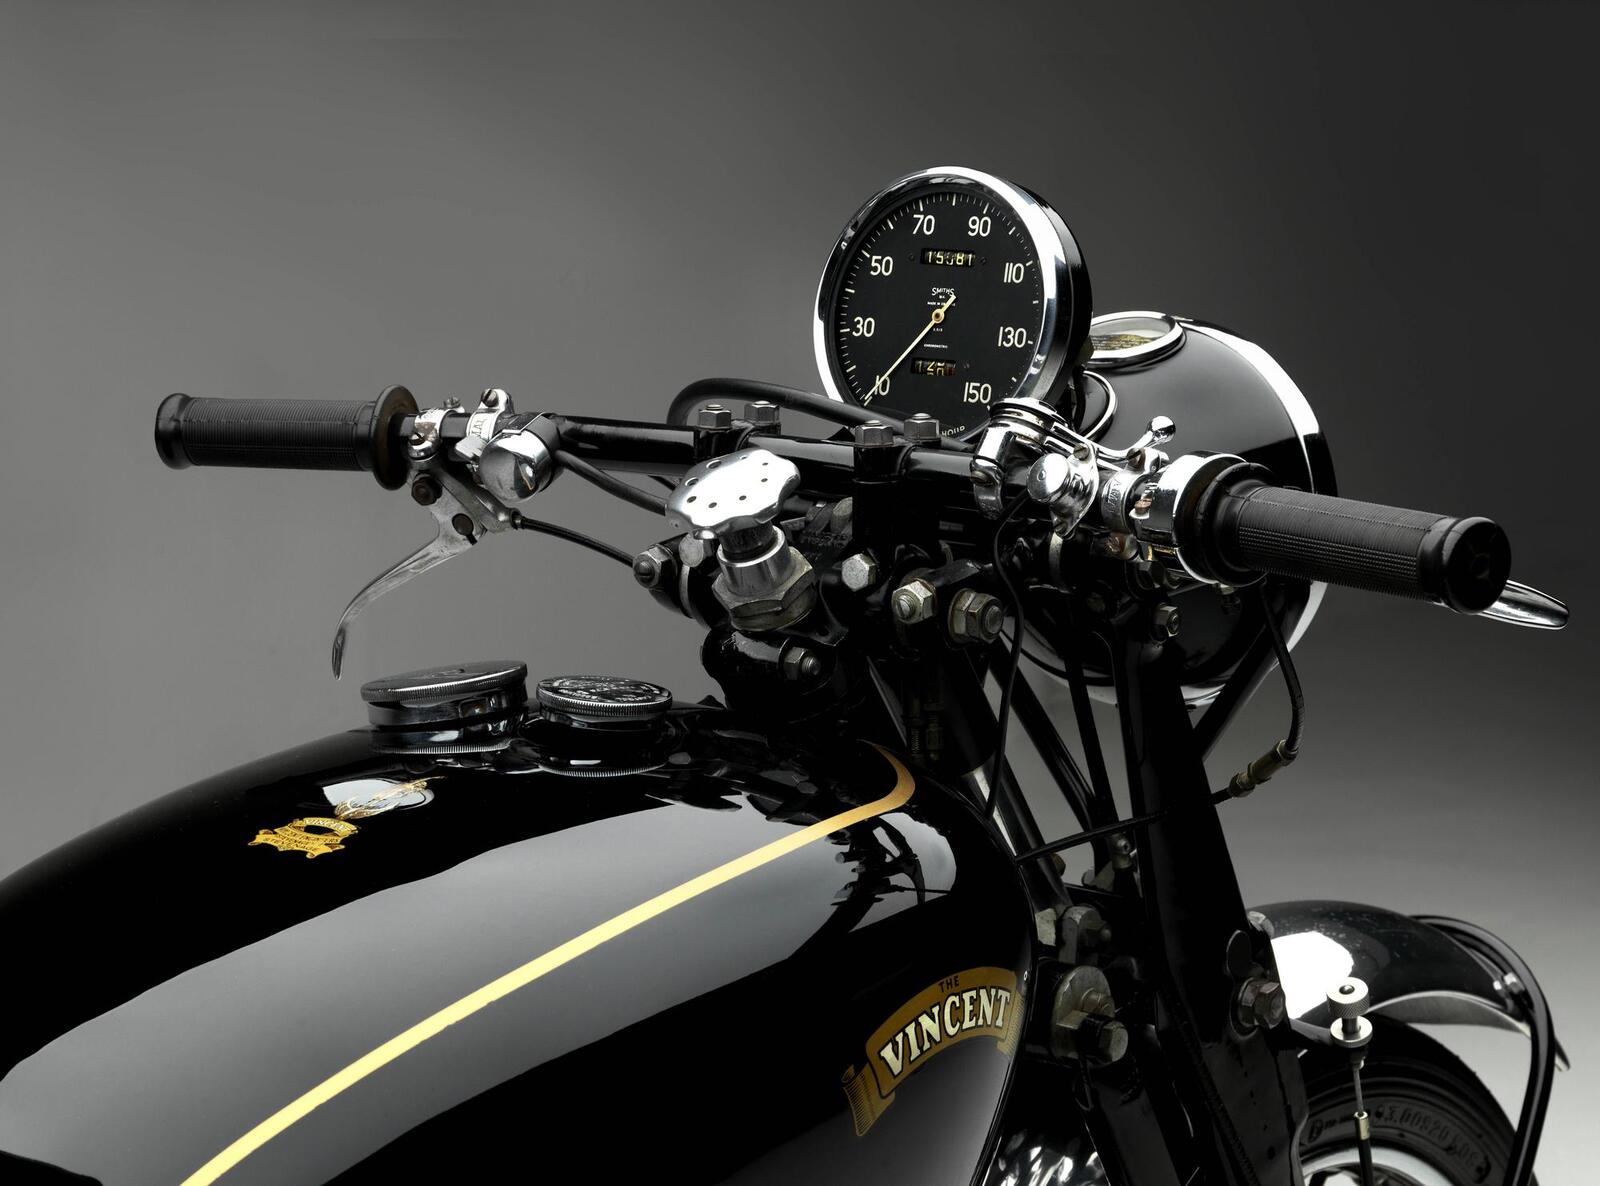 Photographs of beautiful Motorcycles